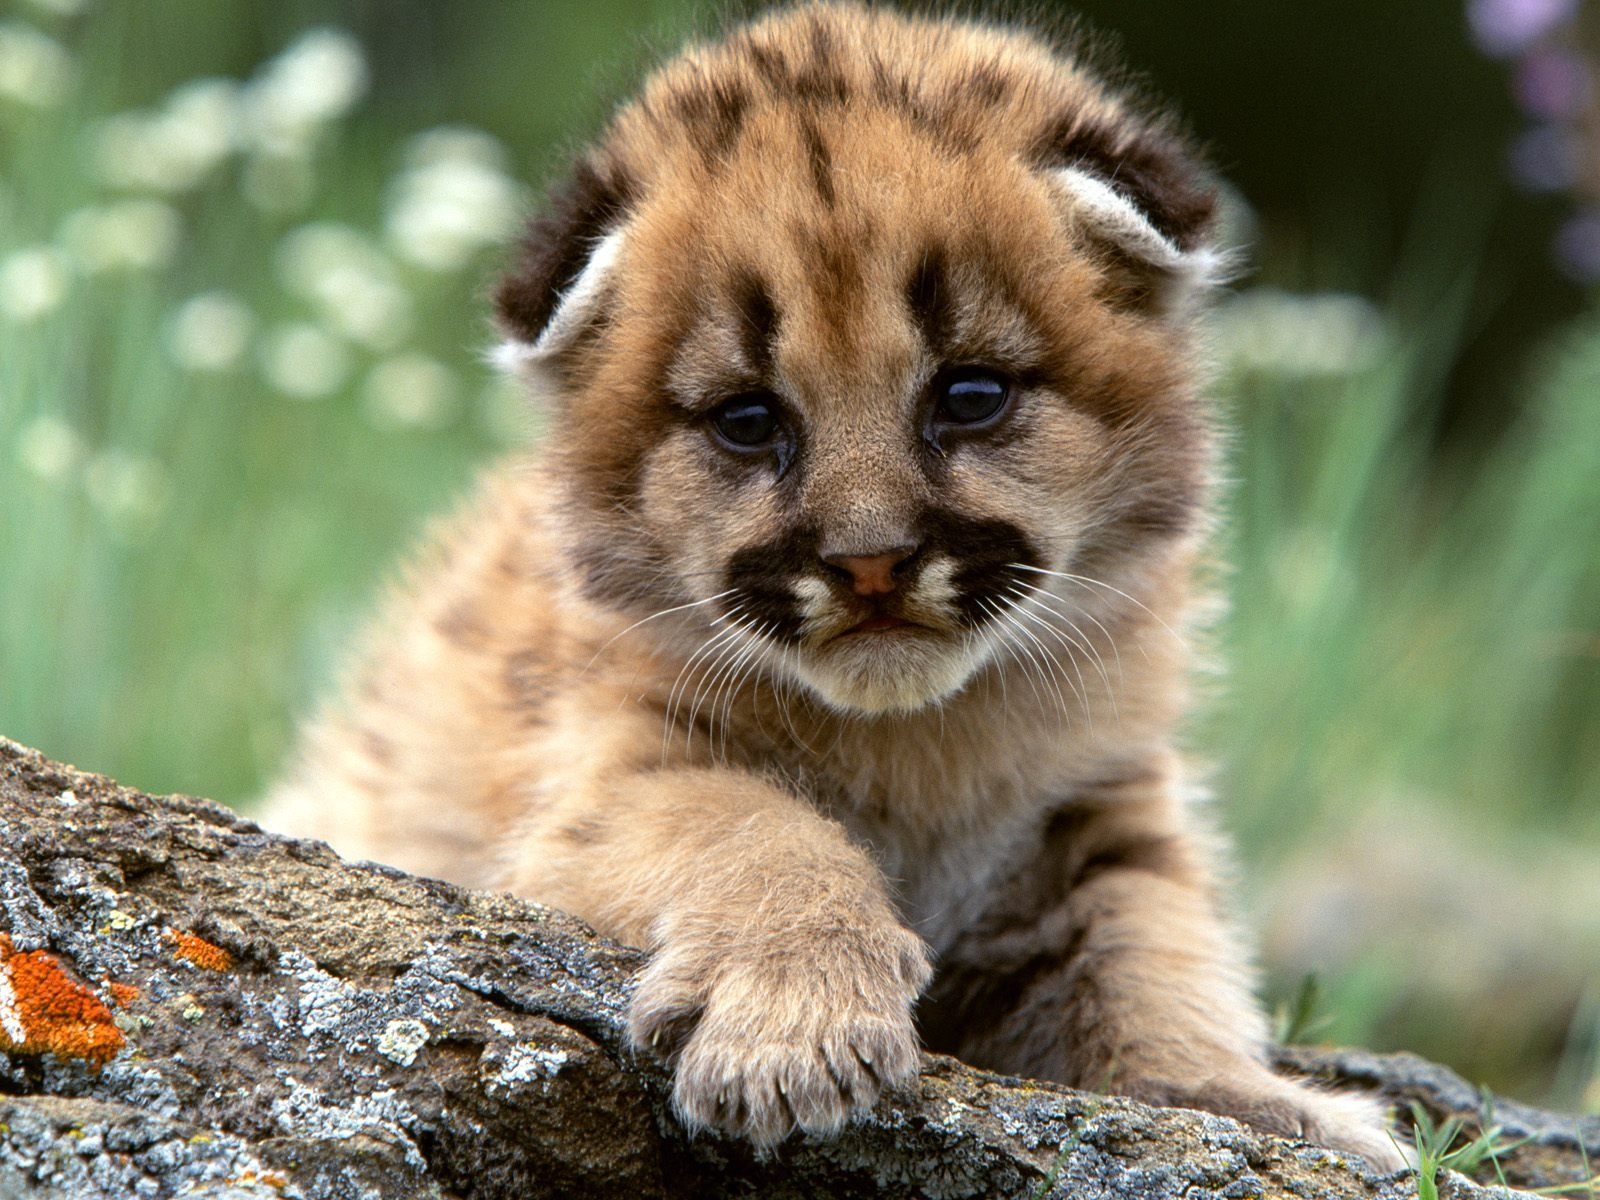 Mountain Lion Cub Wallpaper Baby Animals Animals Wallpaper in jpg format for free download